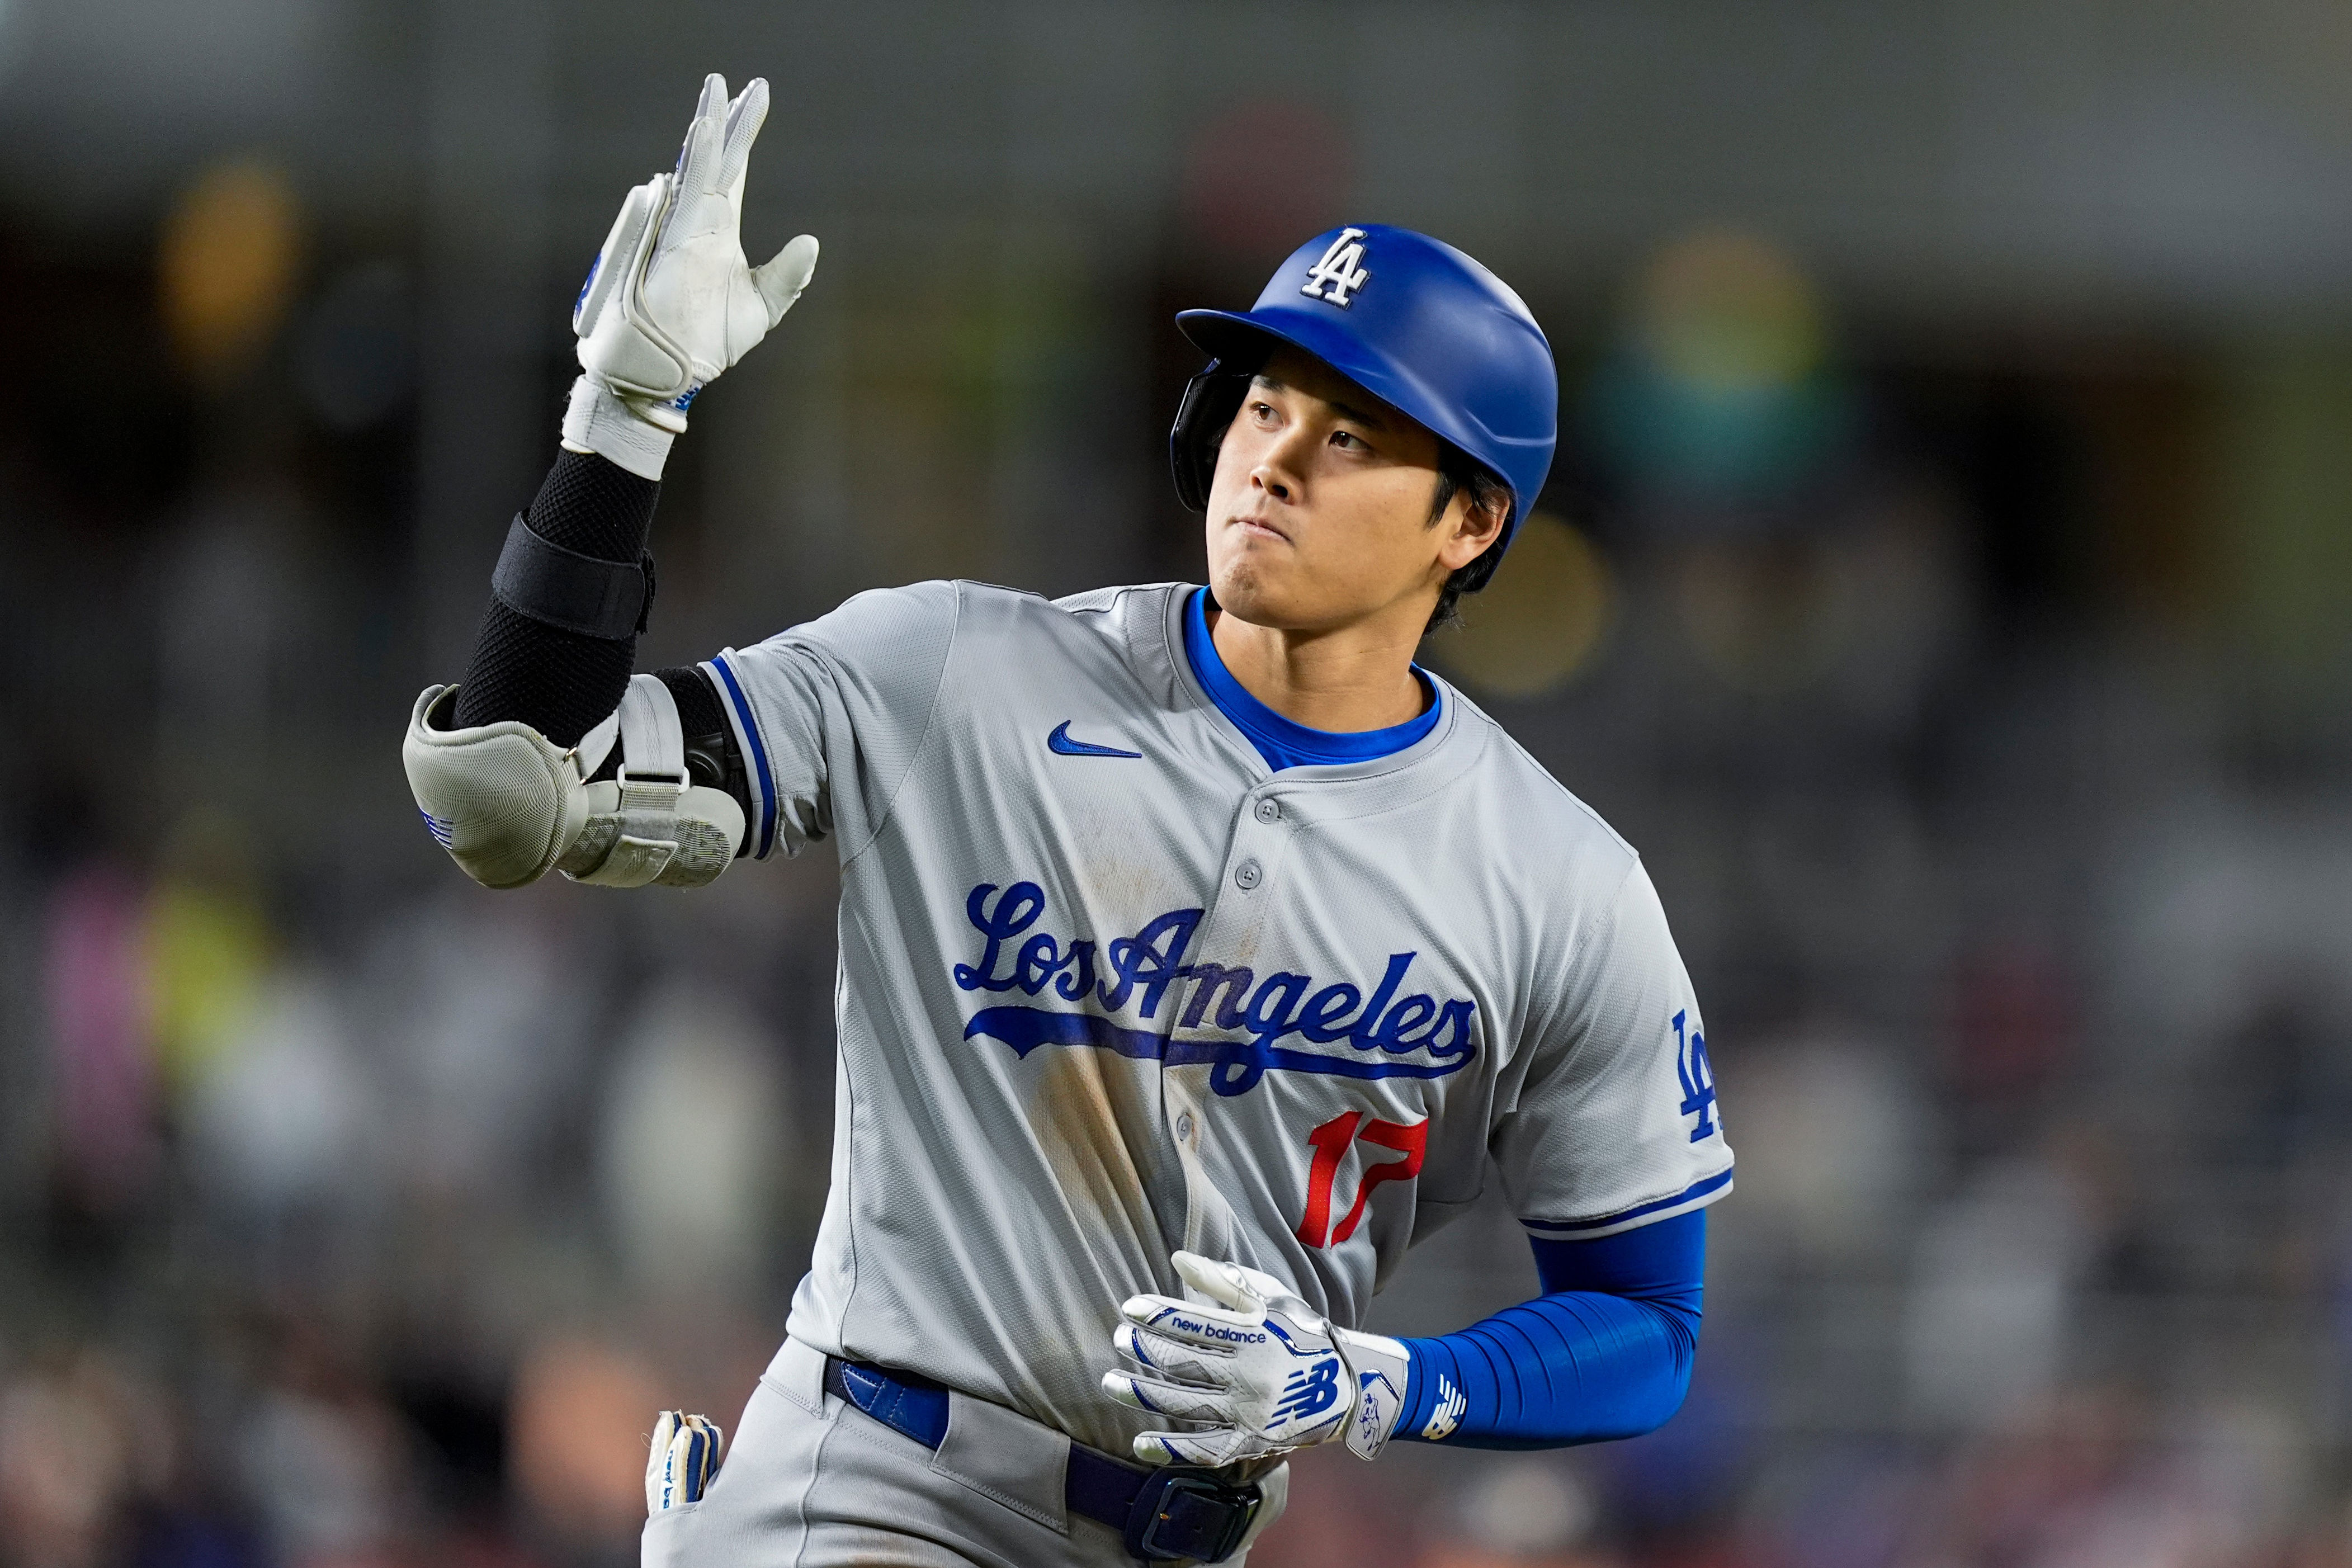 dodgers star shohei ohtani’s interpreter pleads guilty to transferring $17m from player’s bank account